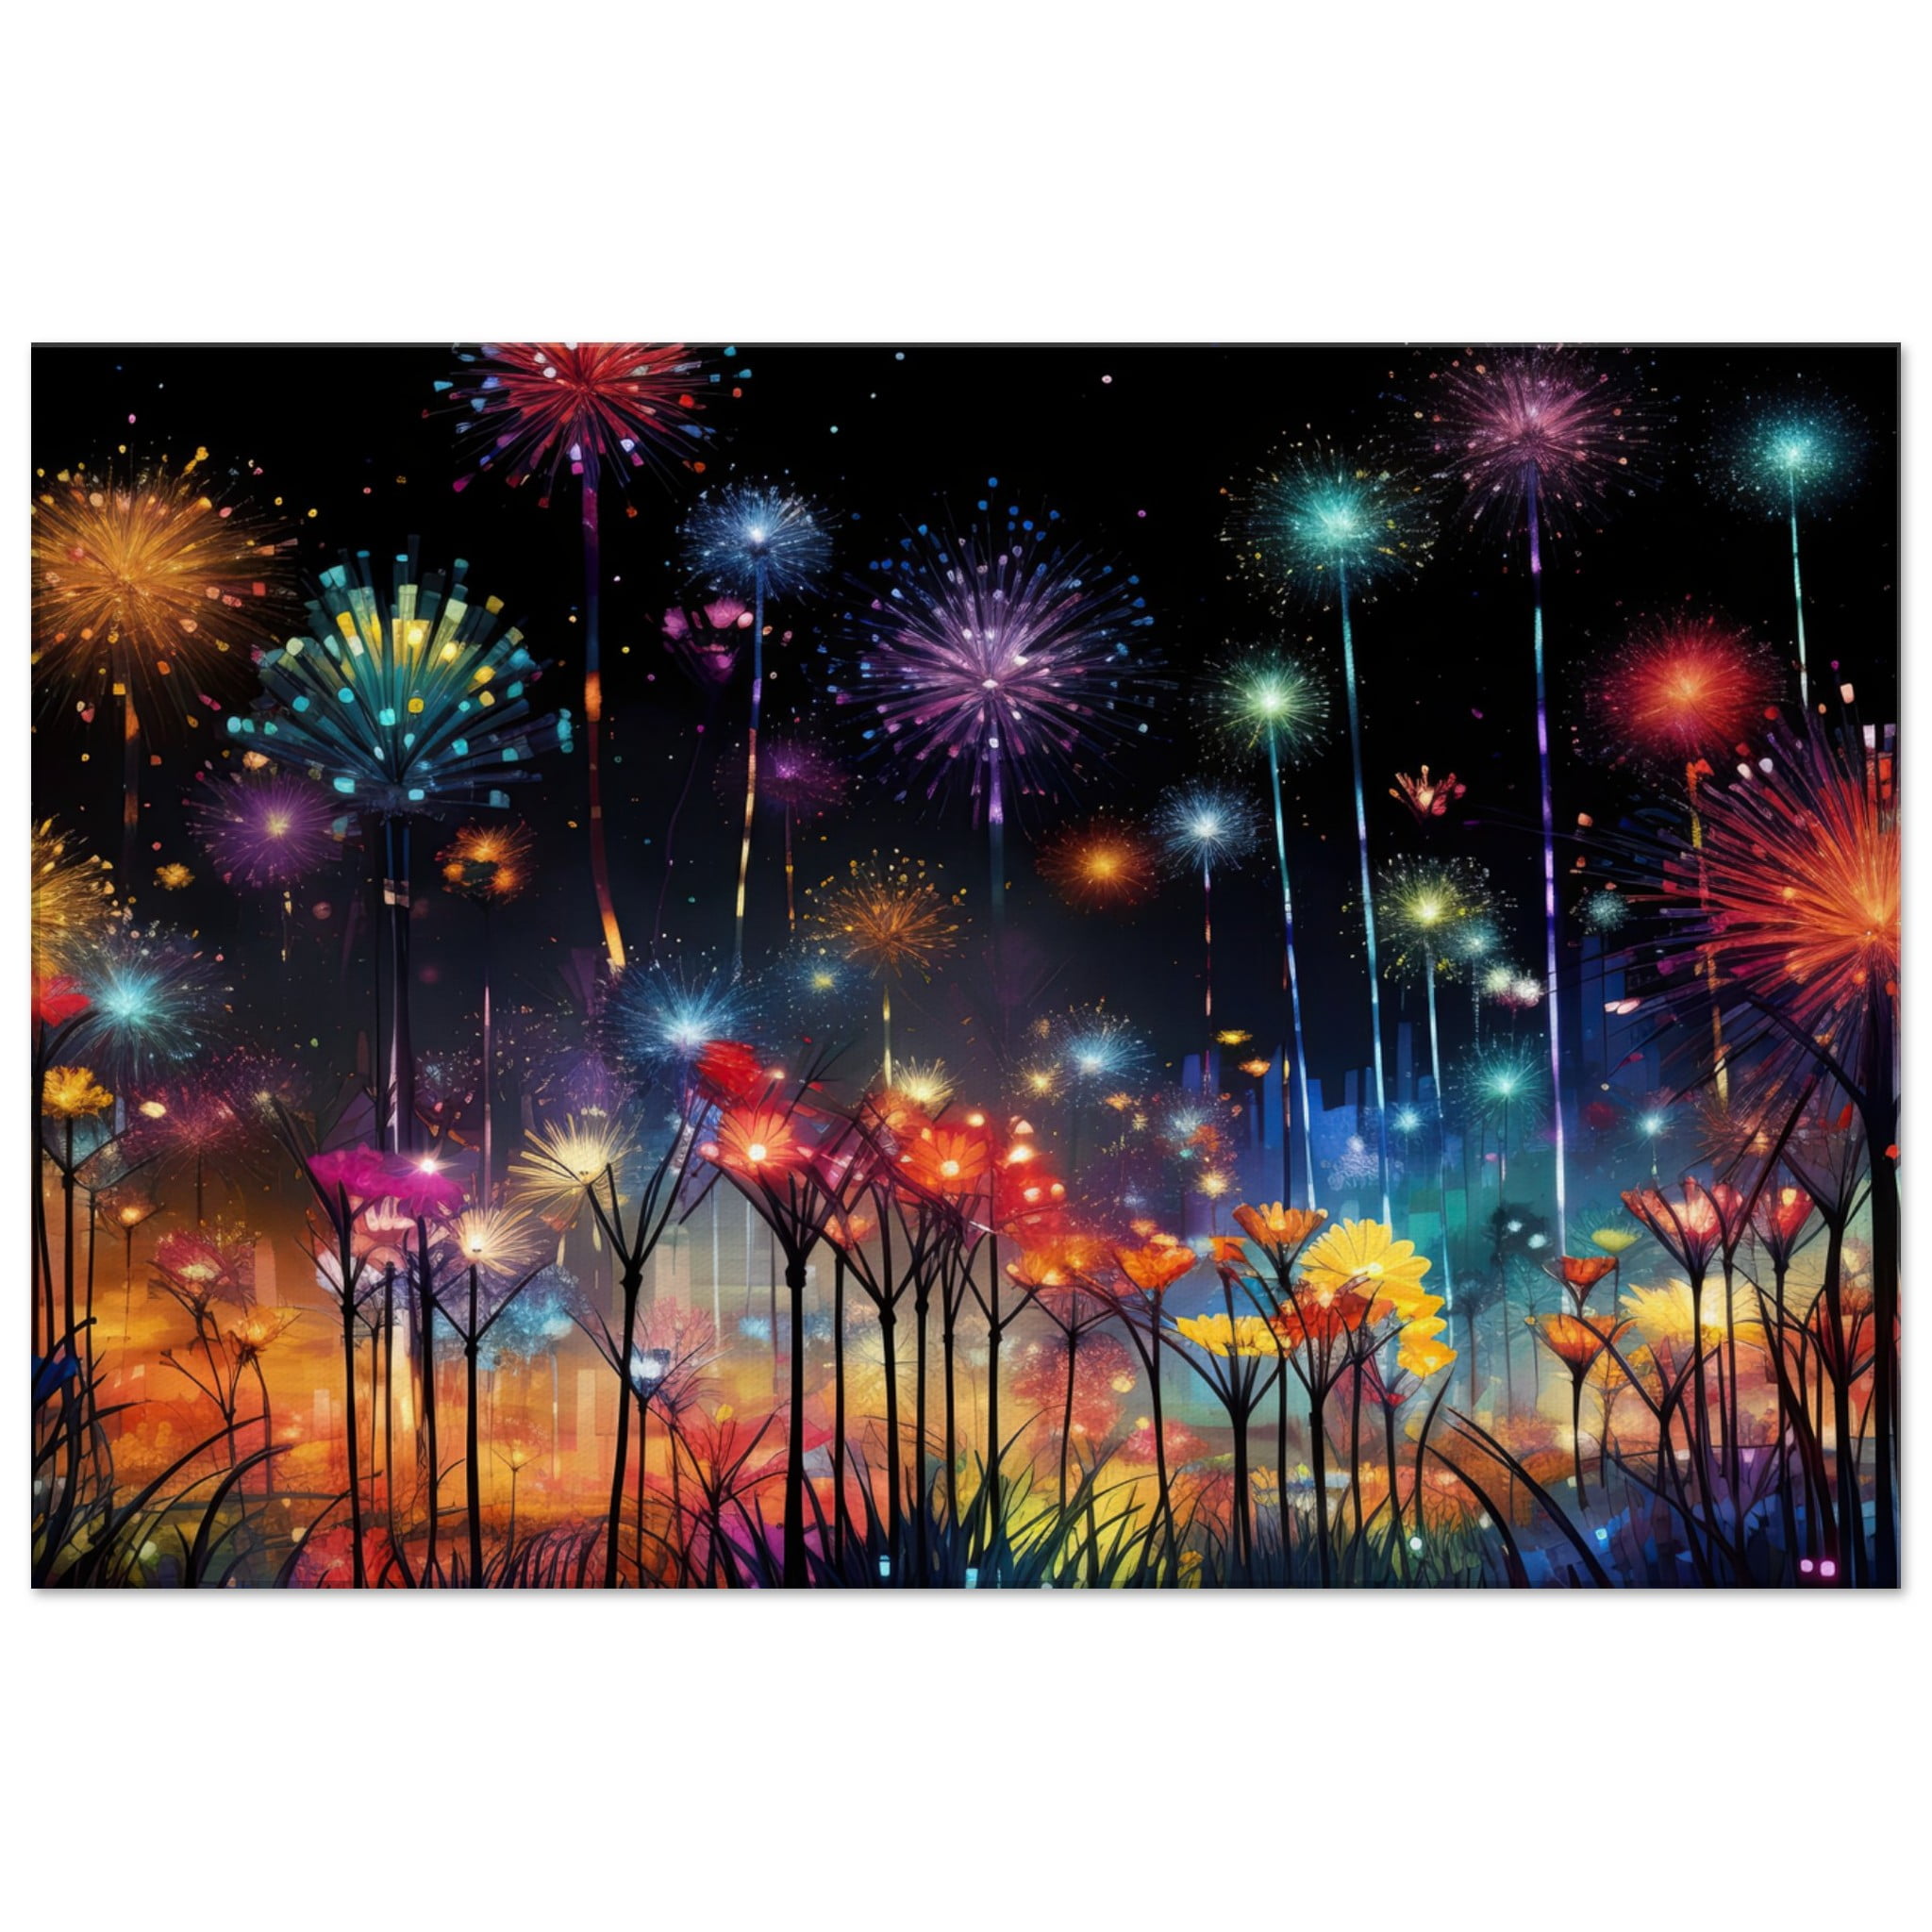 Fireworks and Flowers of Light and Color – Art Canvas Print – 50×75 cm / 20×30″, Slim